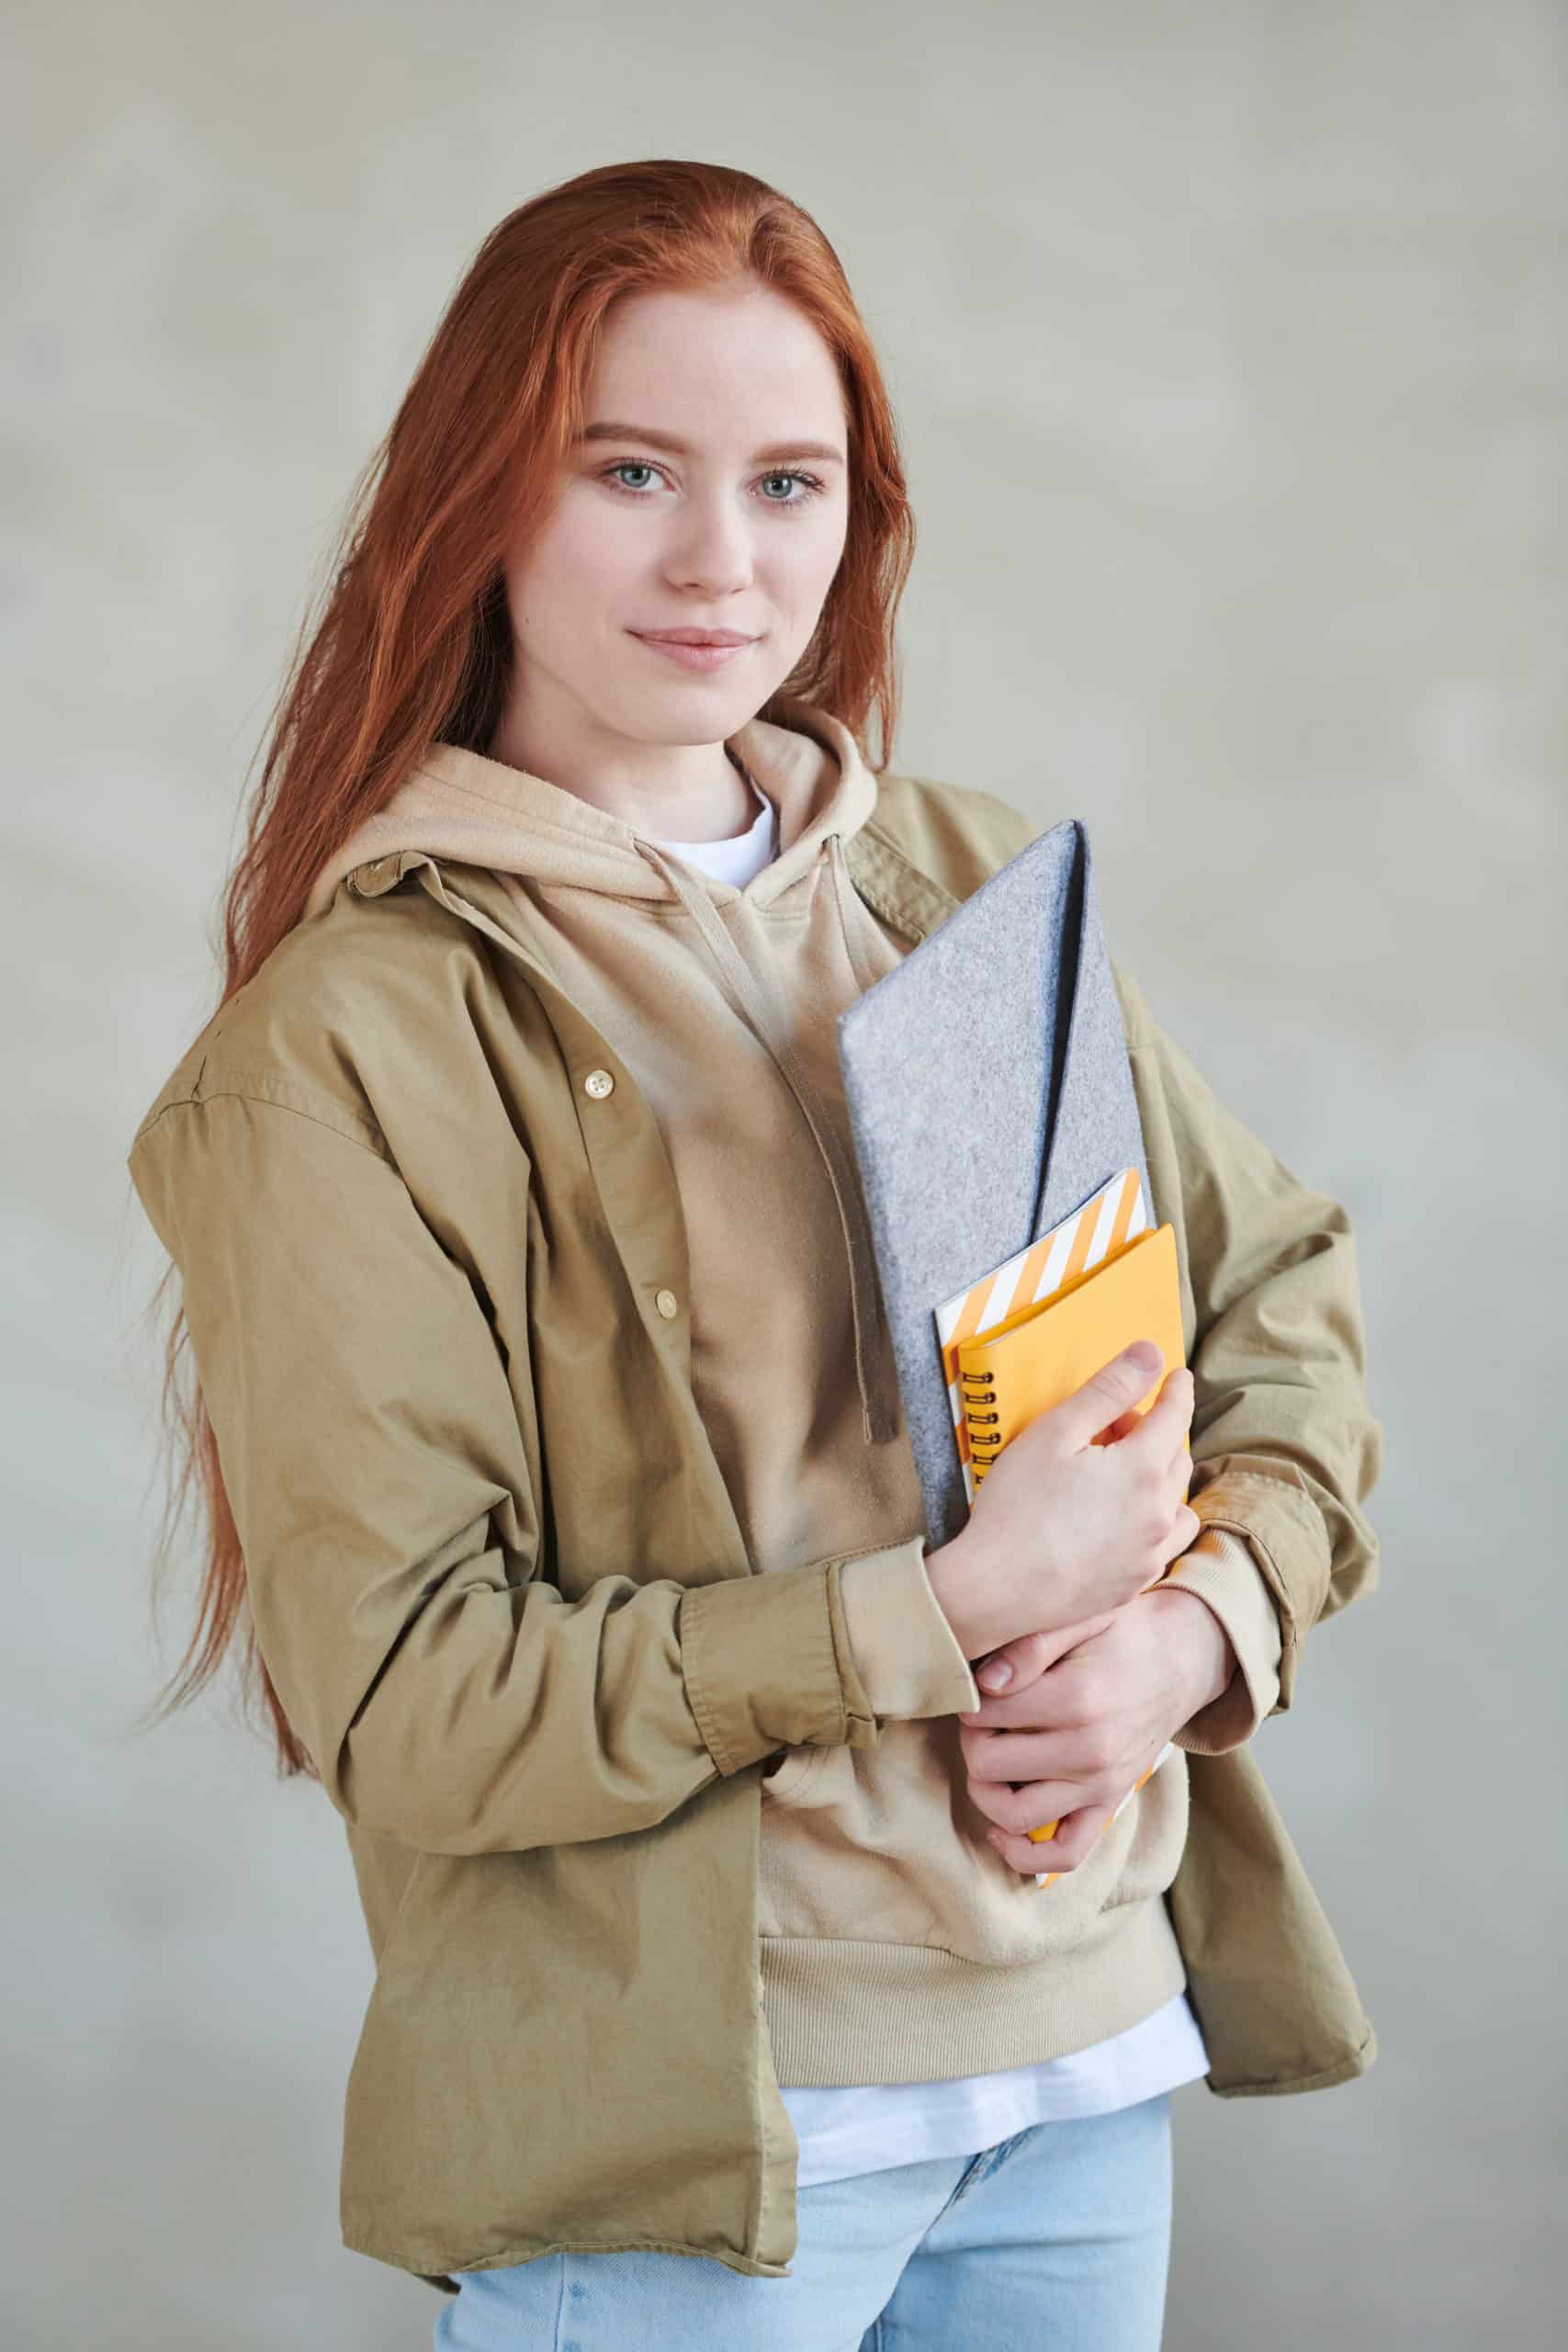 Student with red hair holding textbooks 1221245 scaled